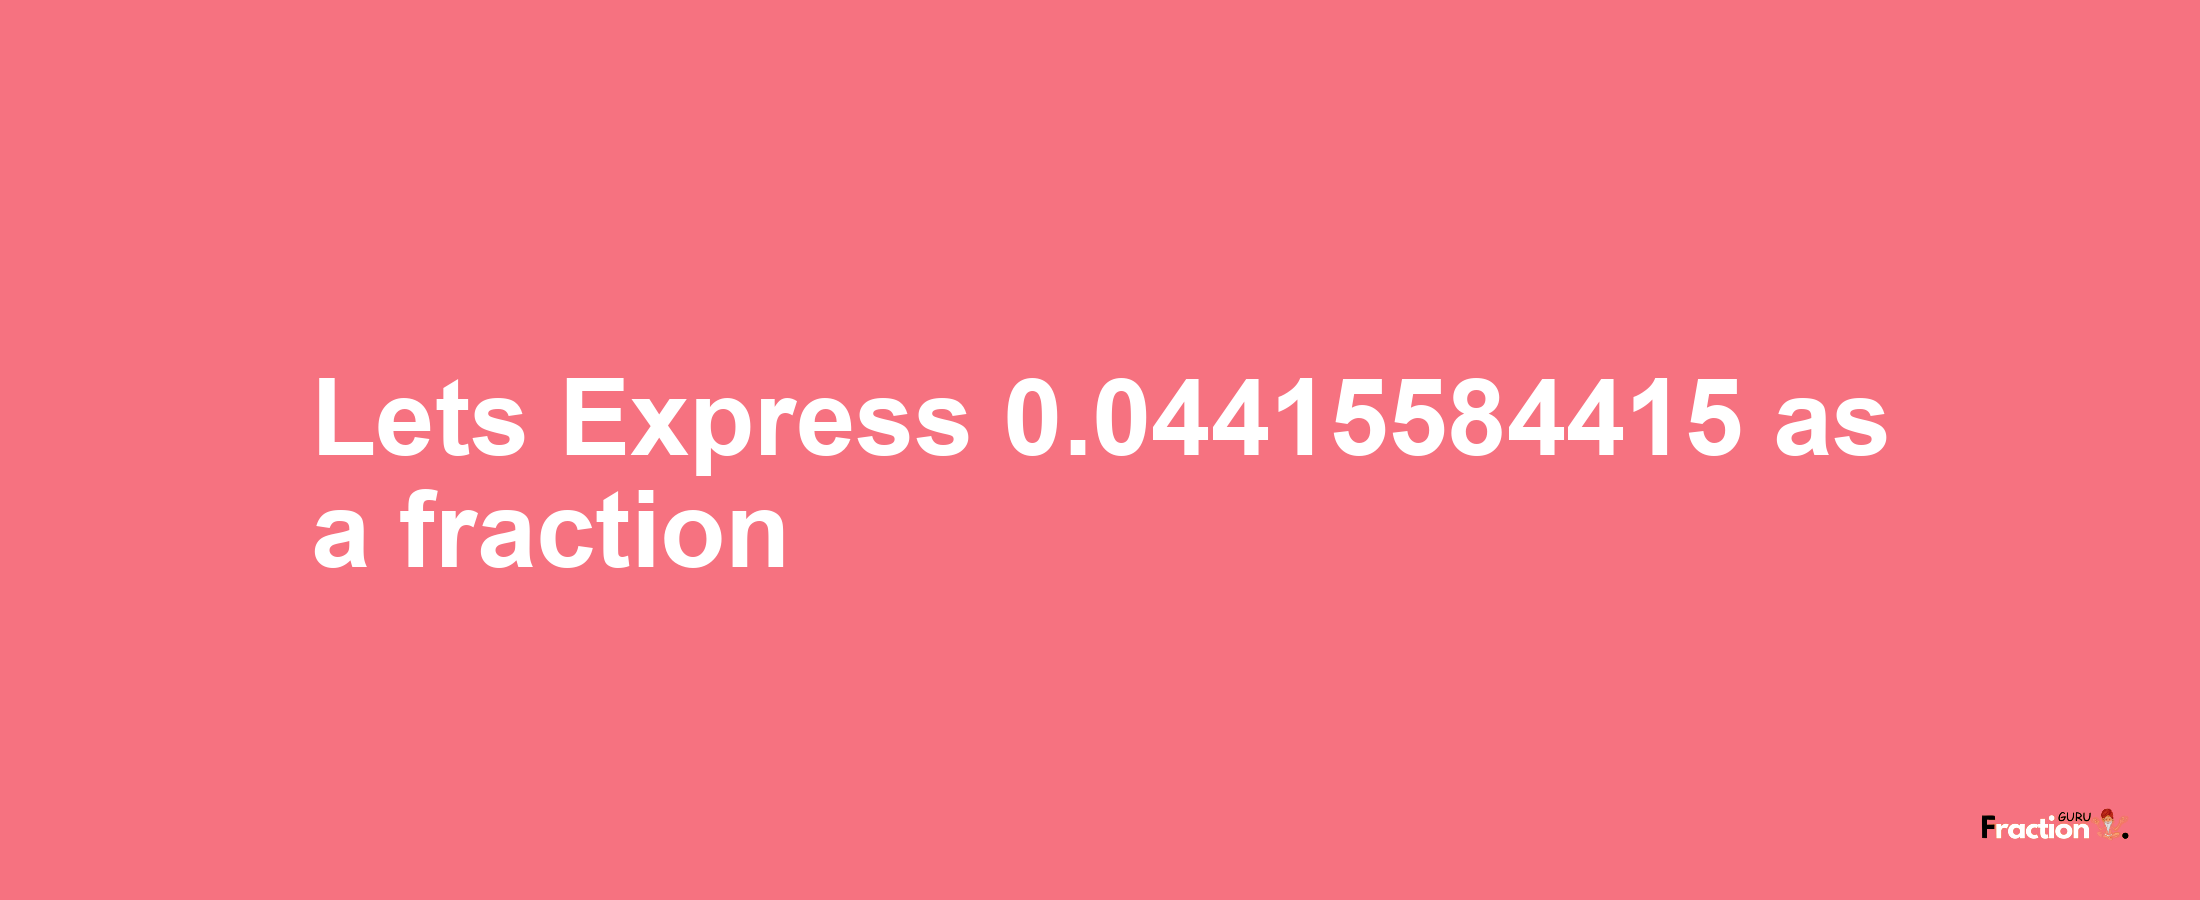 Lets Express 0.04415584415 as afraction